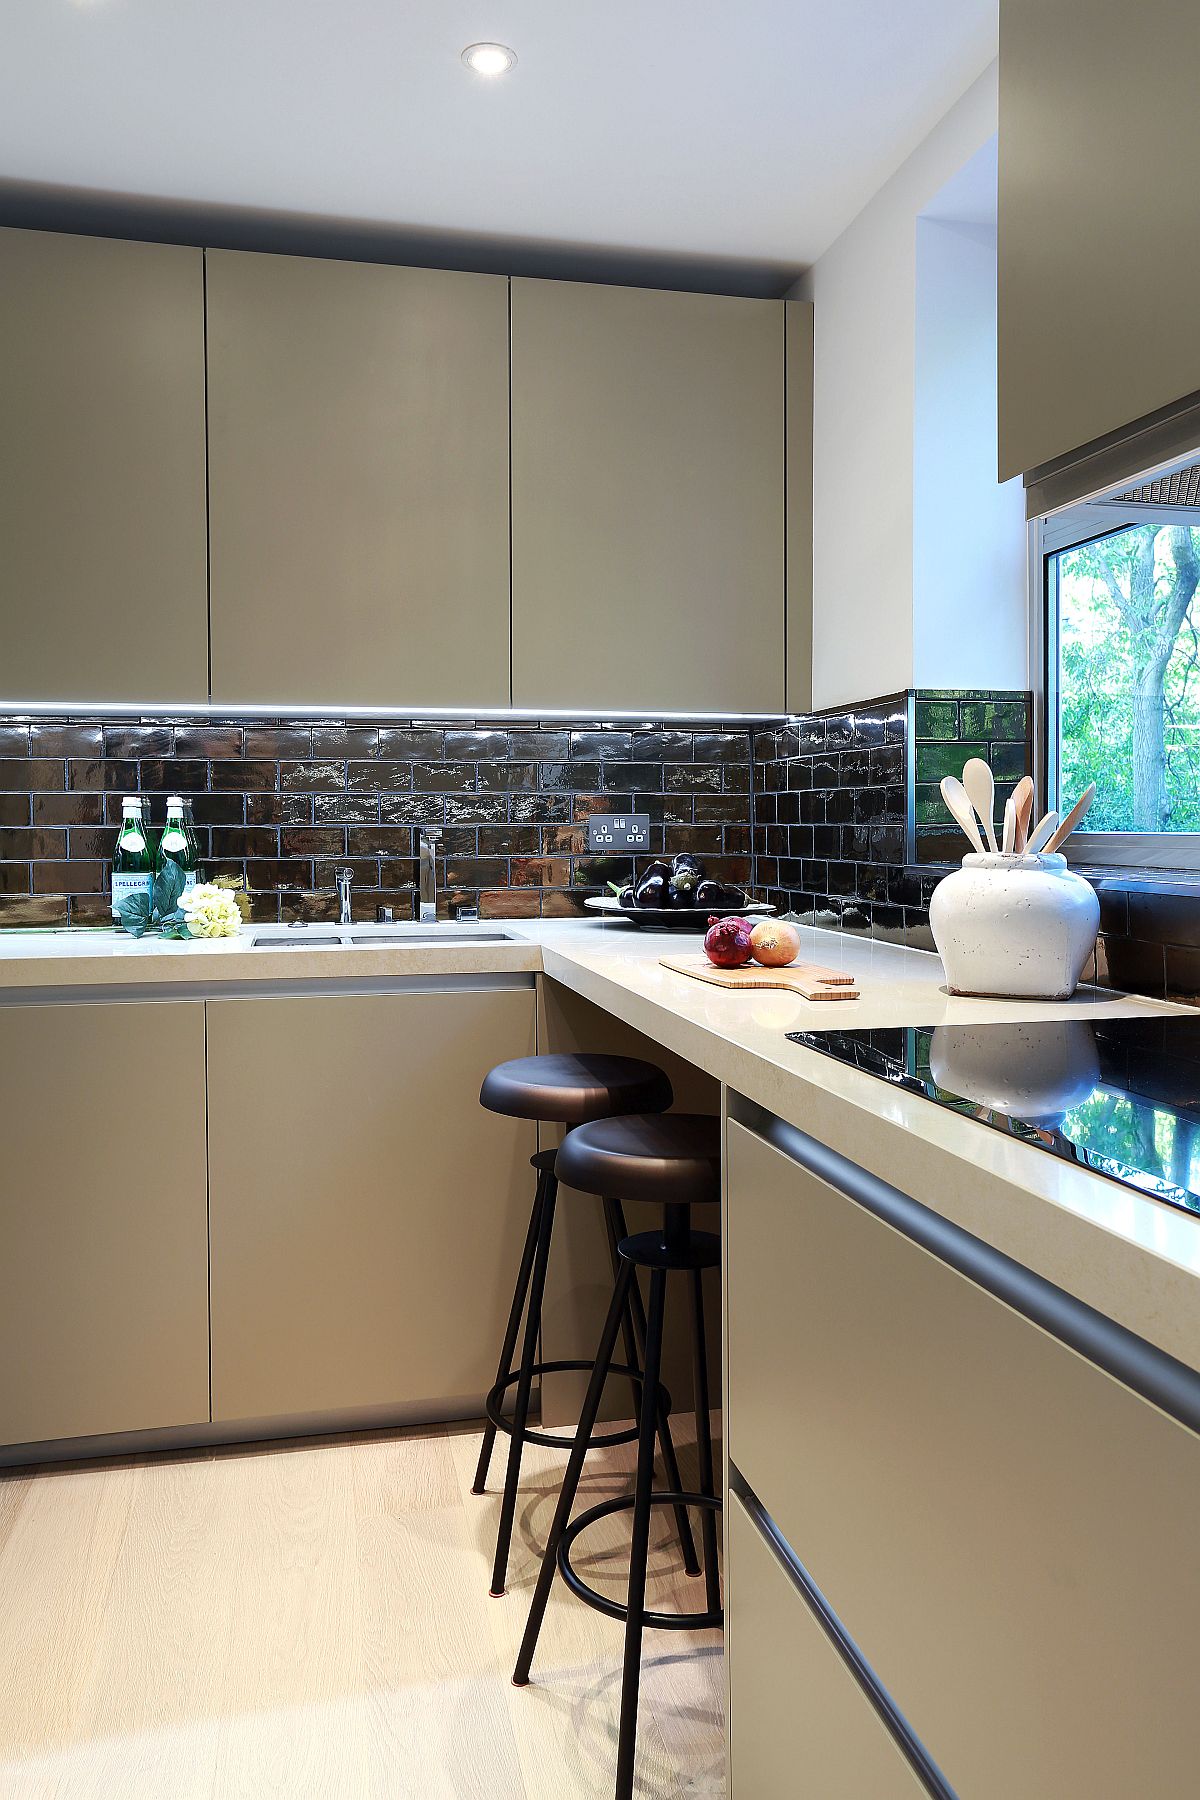 Revamped kitchen space on the second level with a glittering backsplash